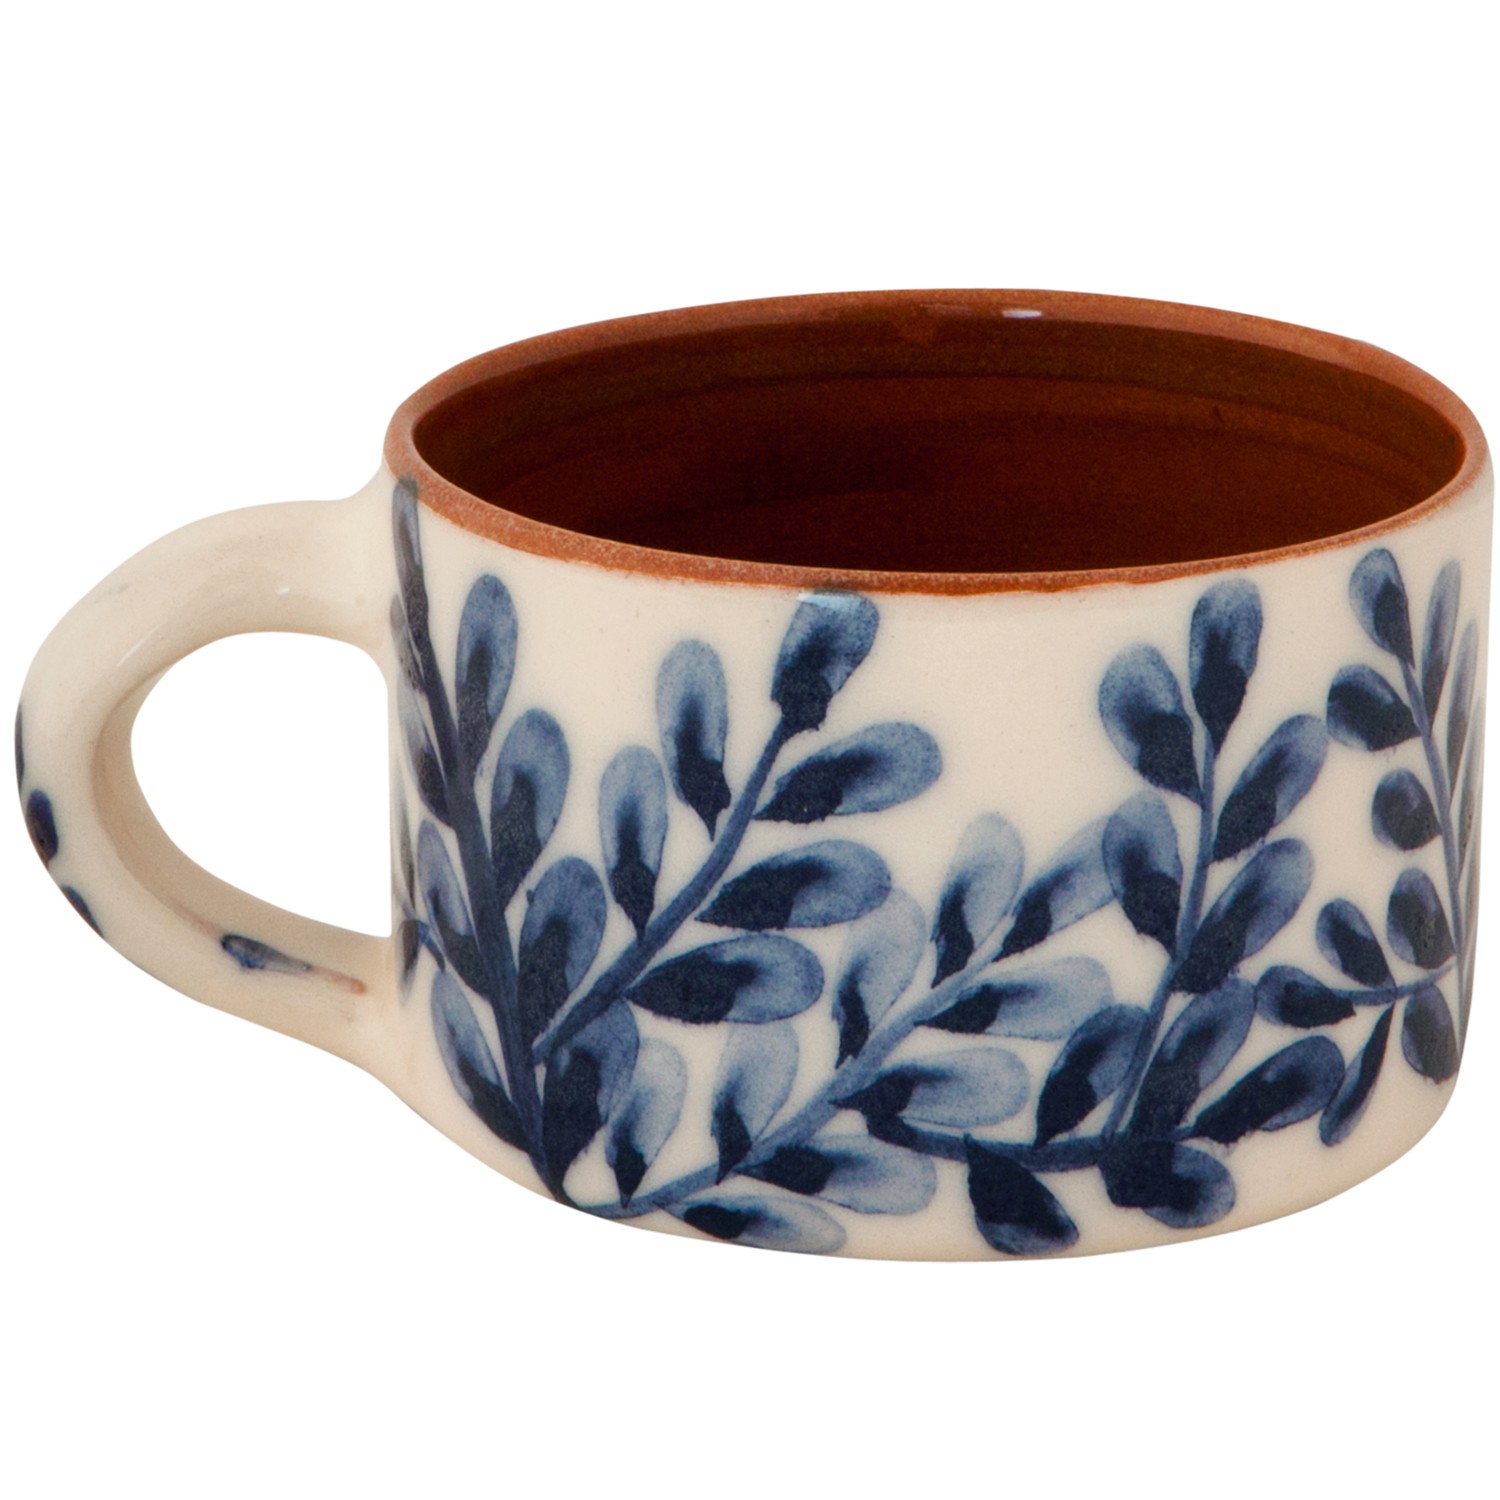 Handmade Pottery Coffee Mugs with Blue and White flowers